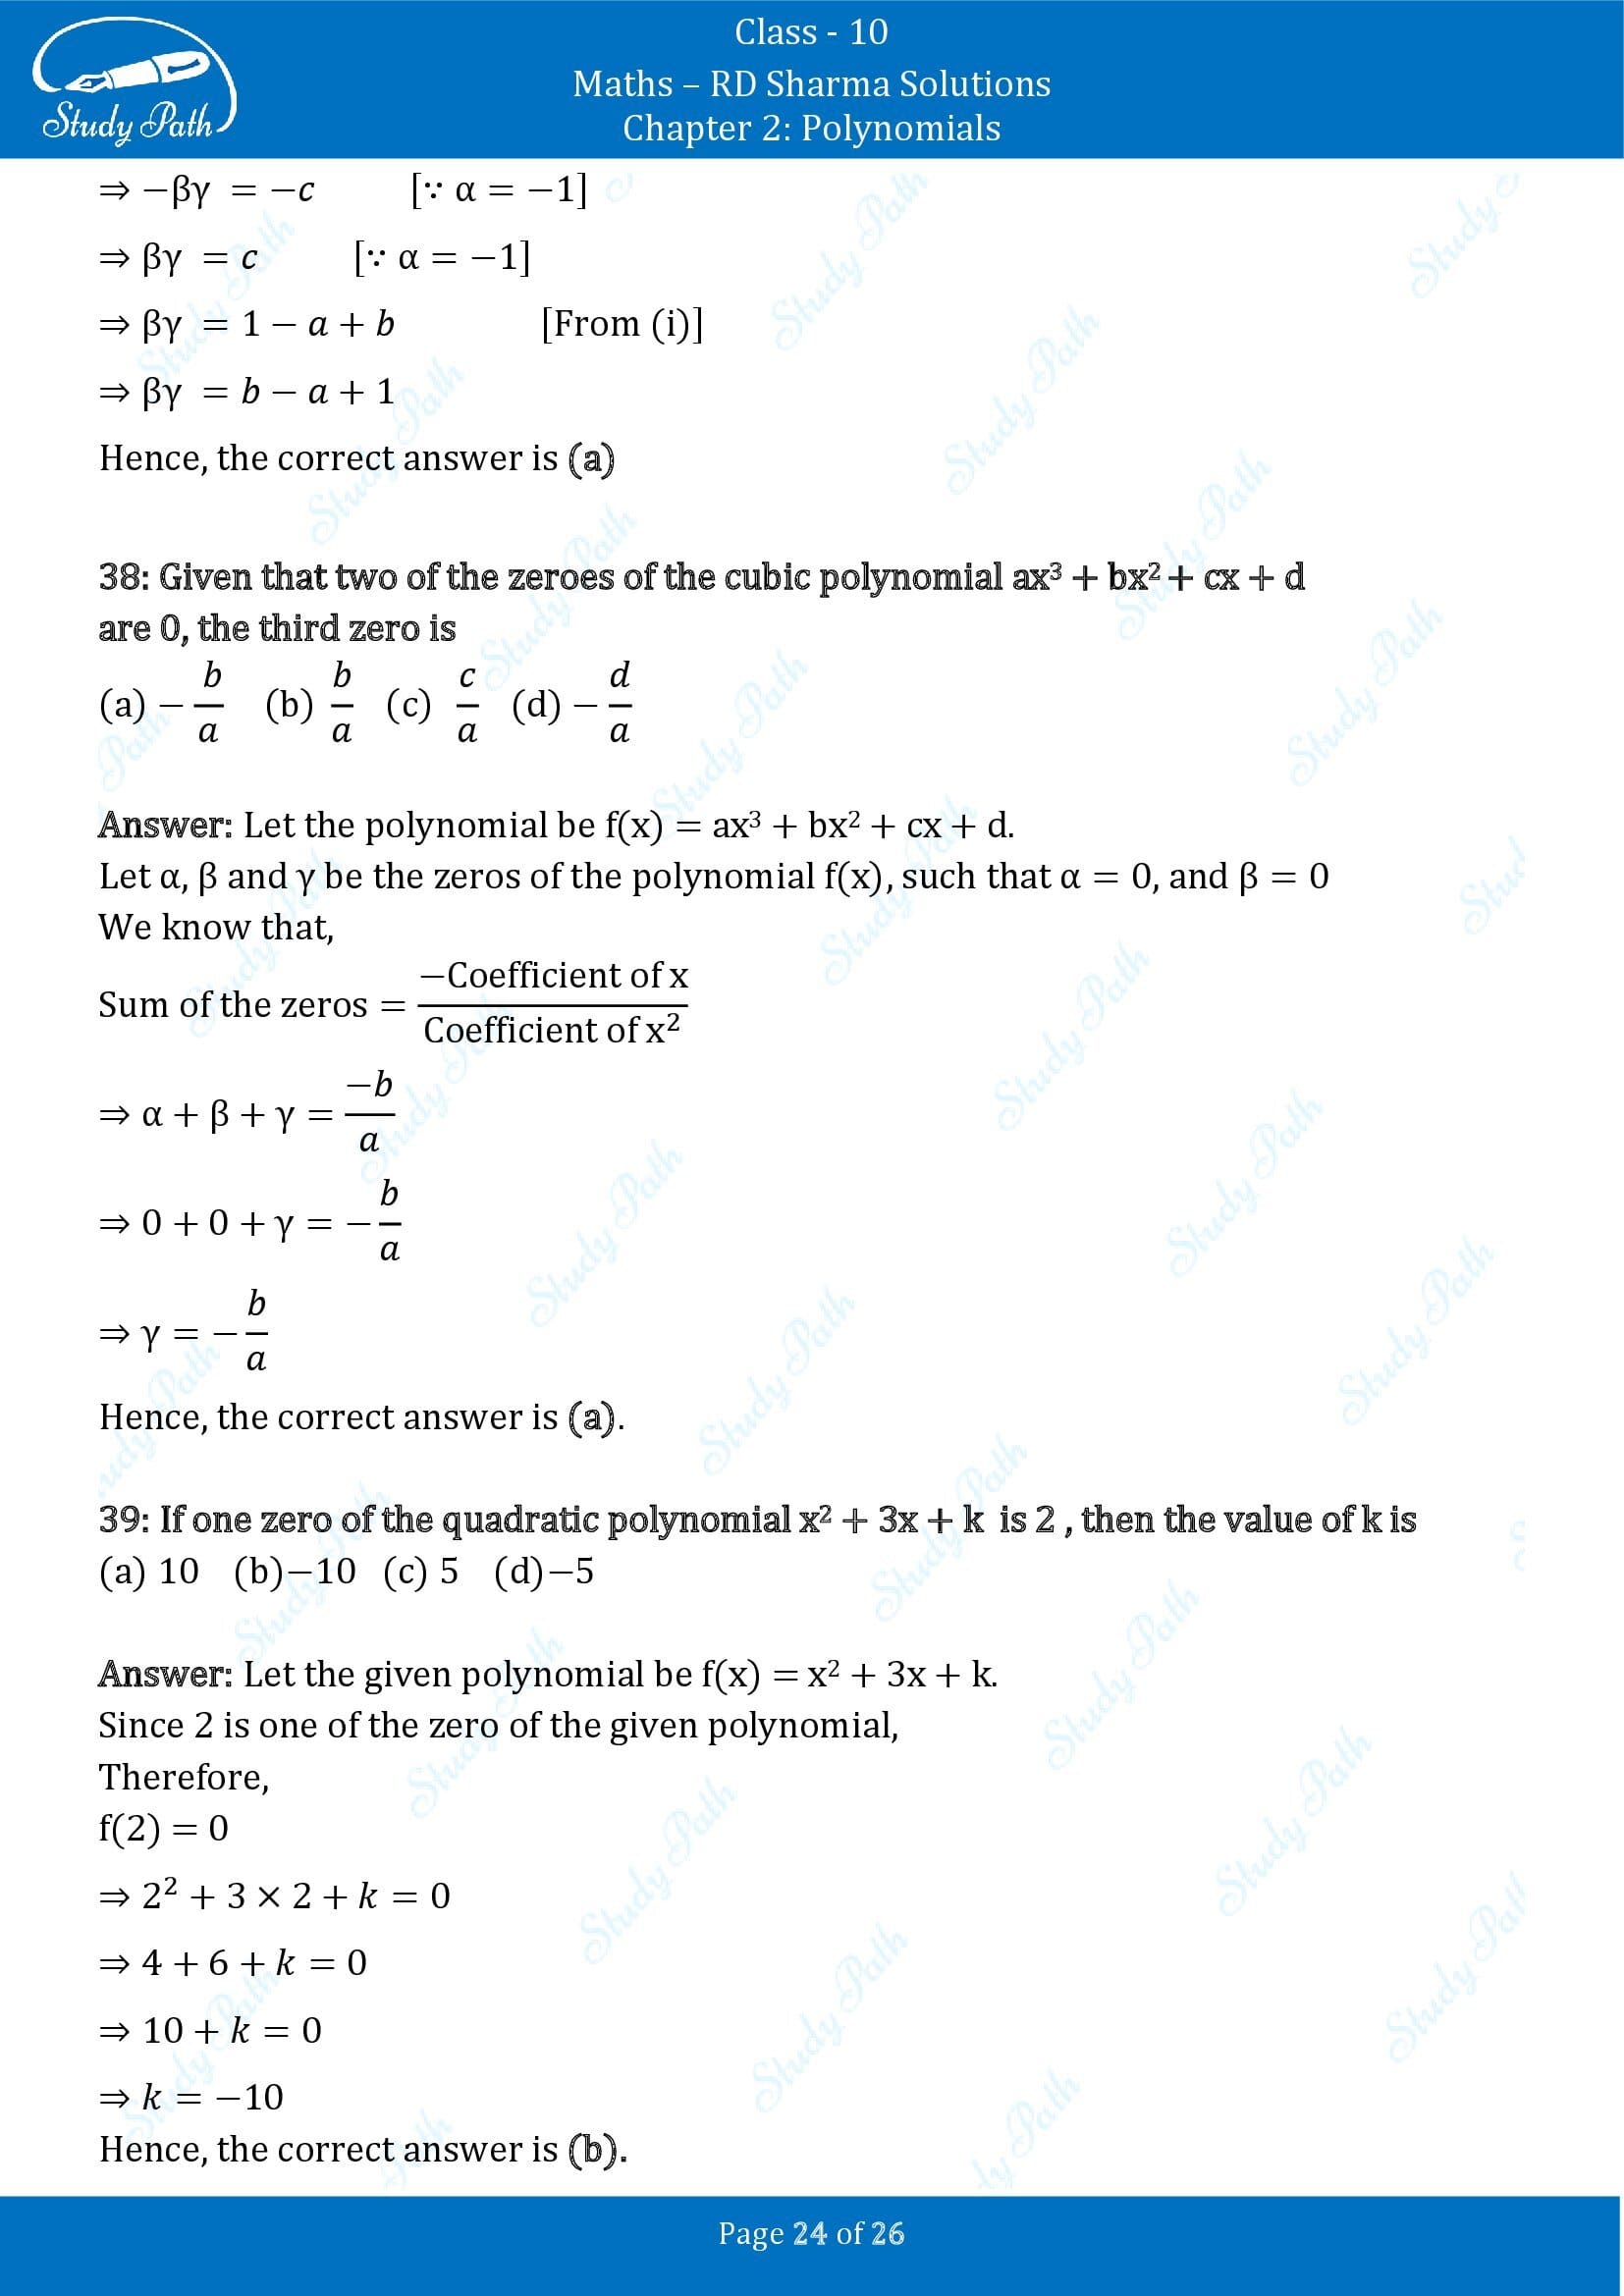 RD Sharma Solutions Class 10 Chapter 2 Polynomials Multiple Choice Questions MCQs 00024